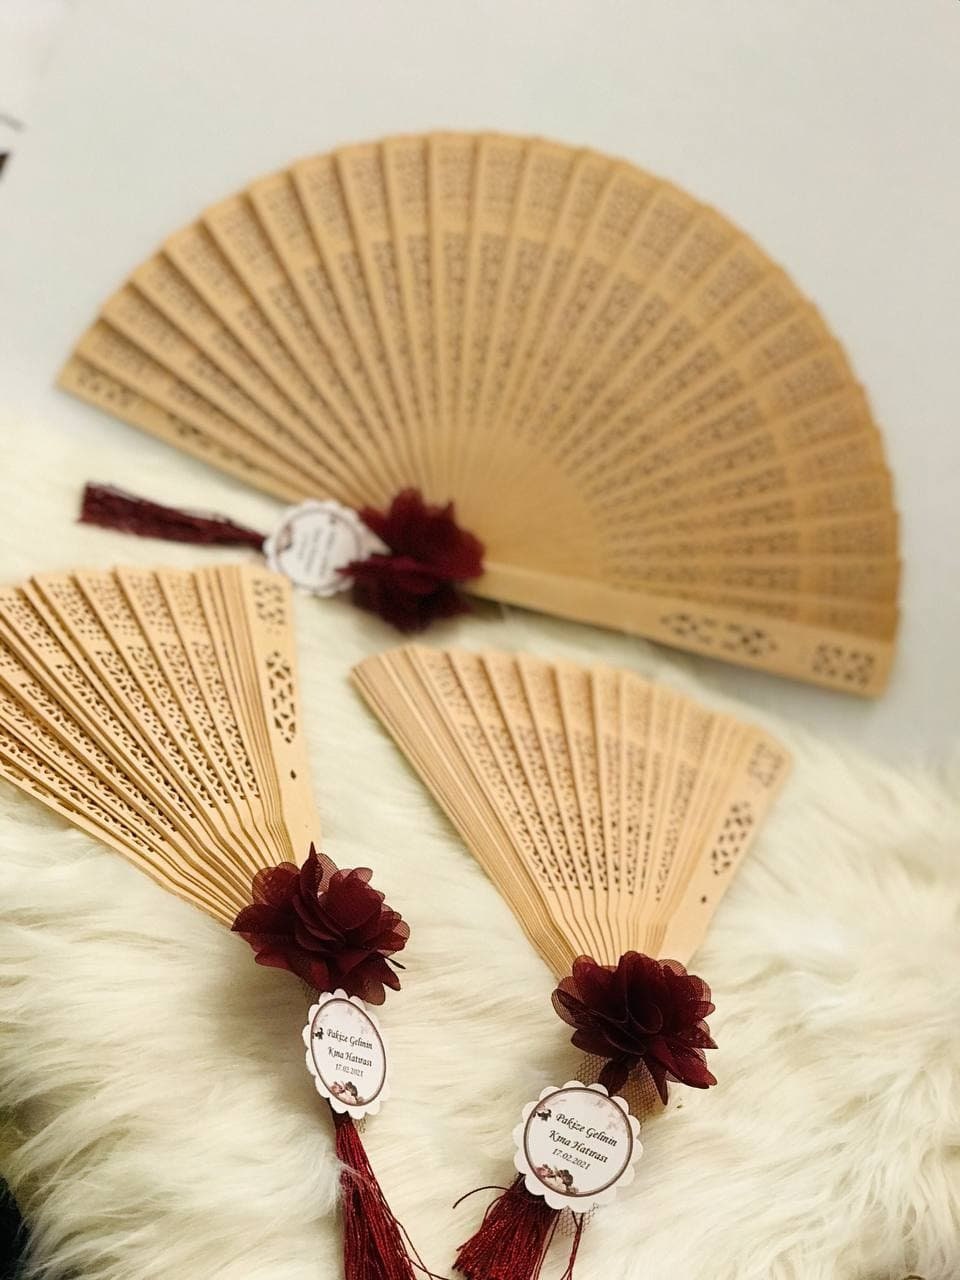 Geetery Set of 24 Sandalwood Fan Wedding Favors with Gift Bags Rustic Folding Hand Fans 24 Pcs Thank You Tags for Favors Wedding Favors for Guests